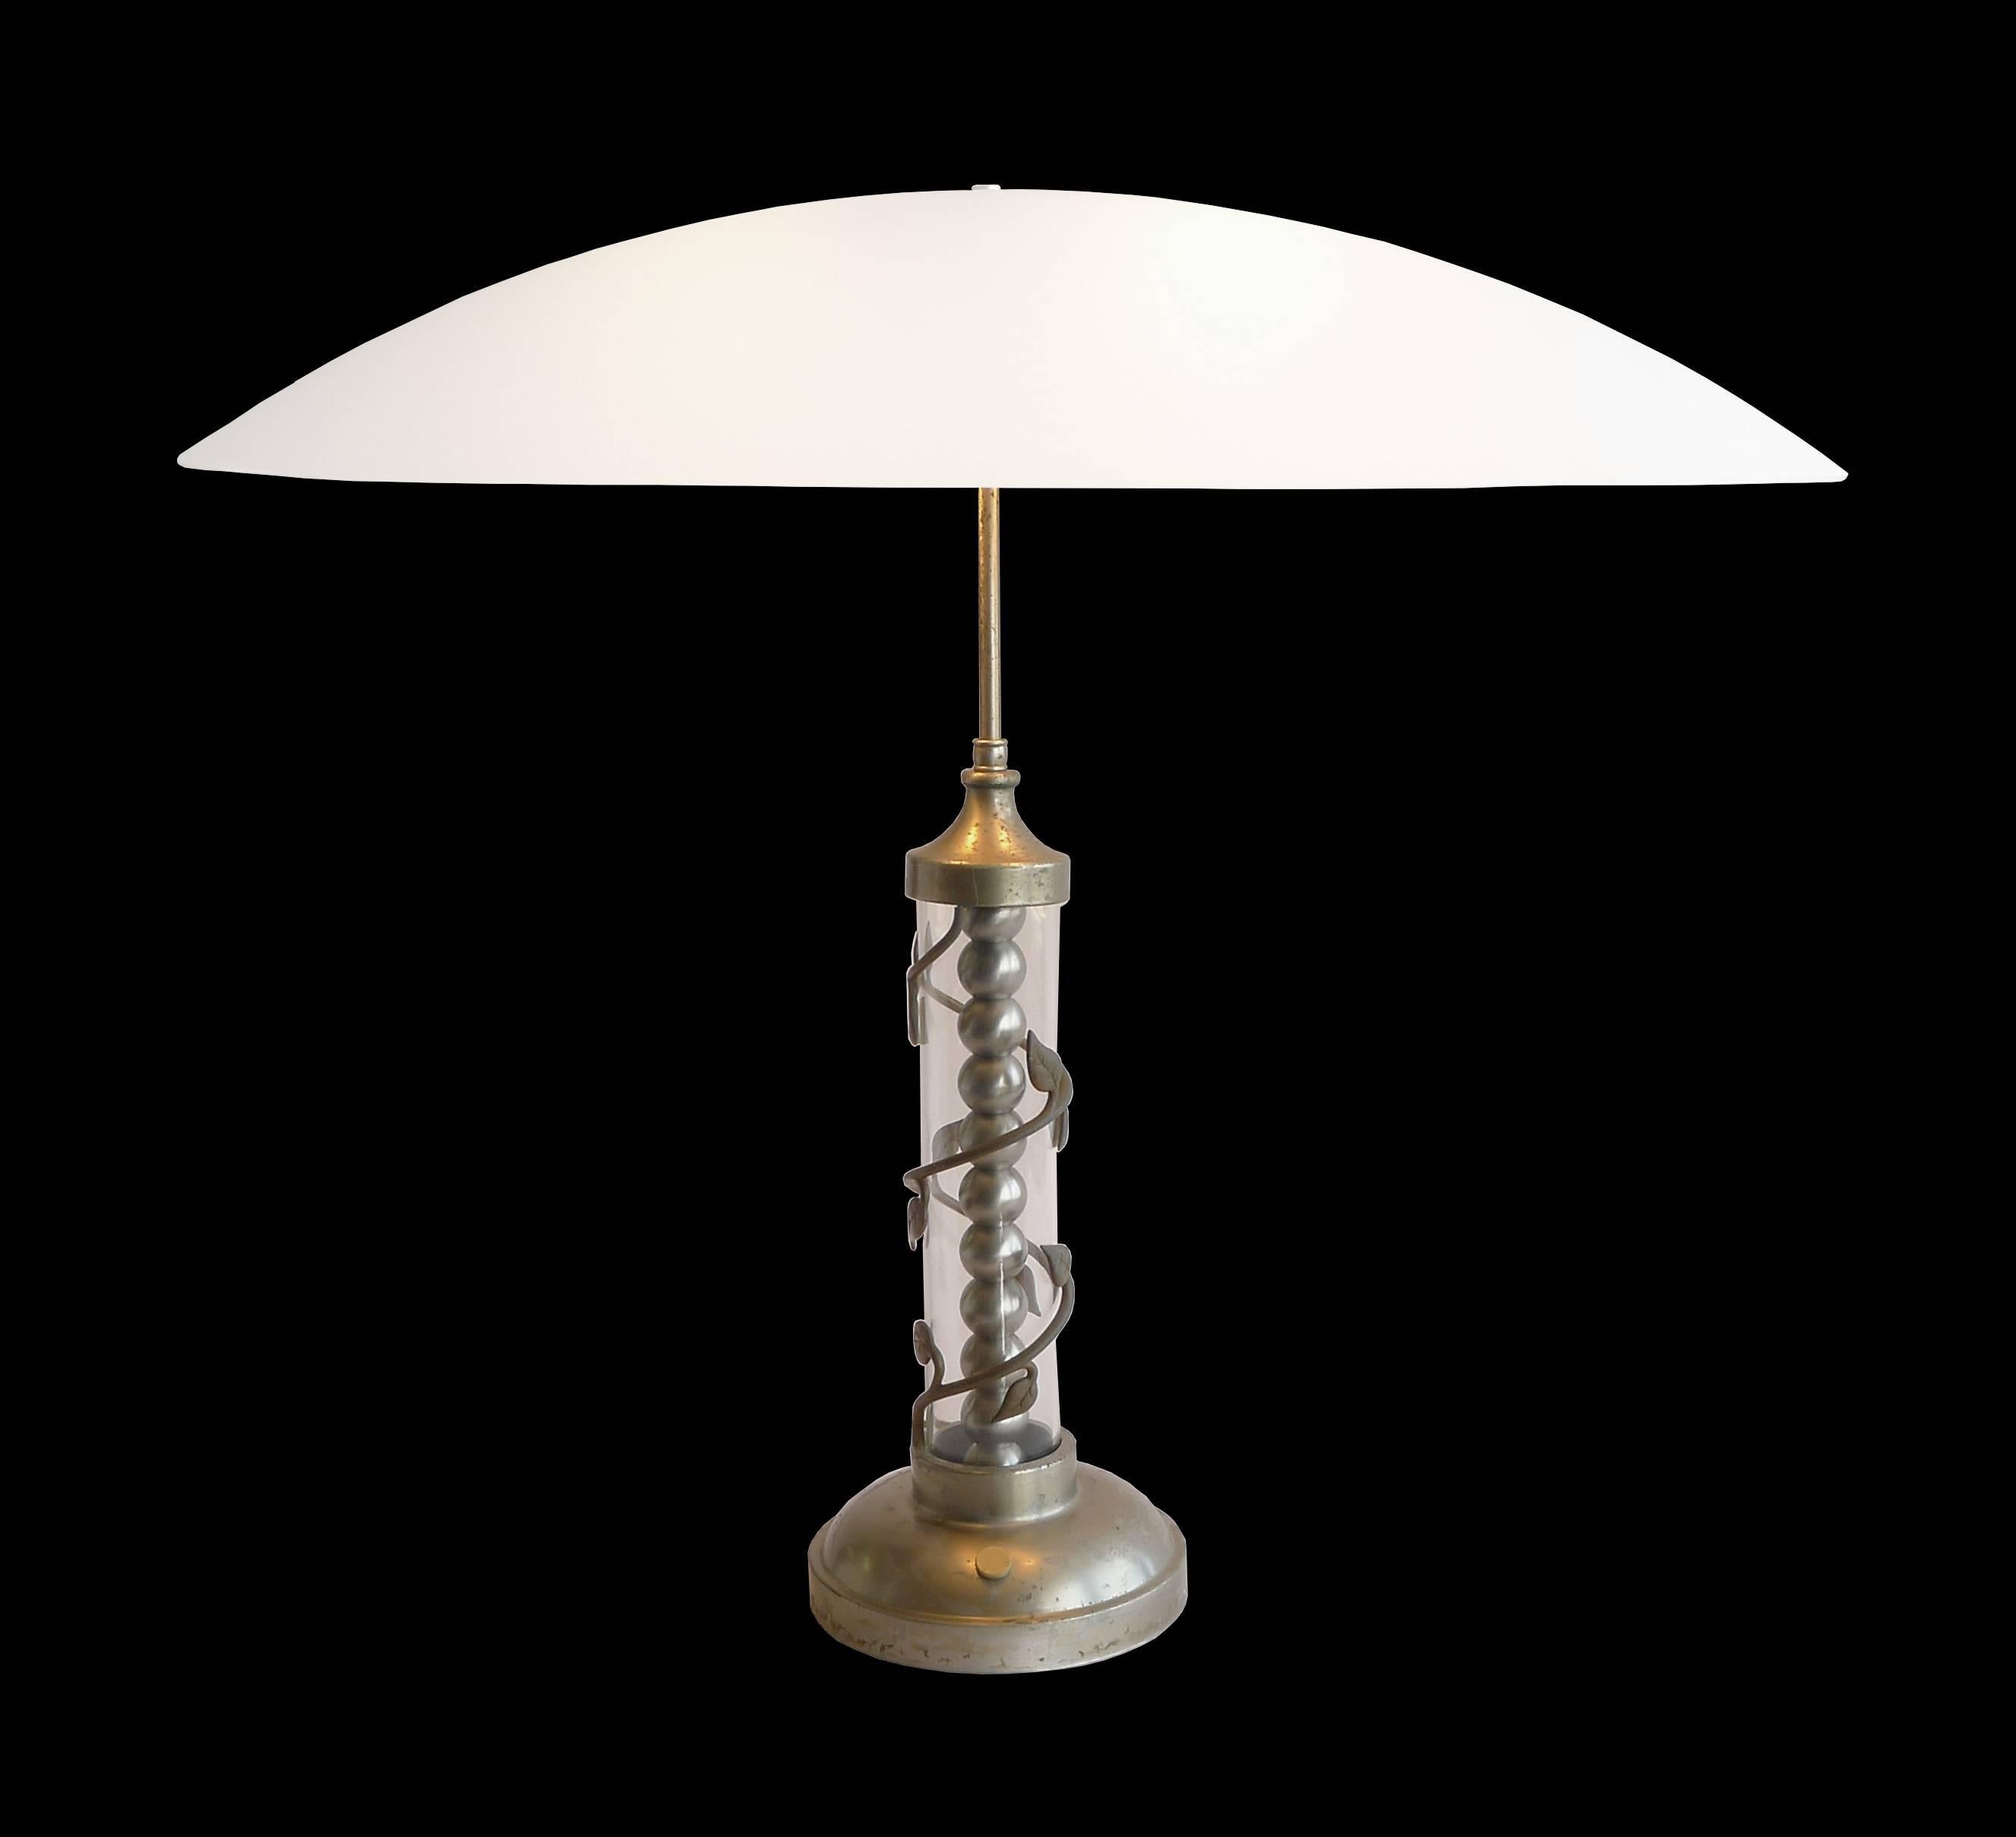 Hollywood Regency table lamp from the 1940s. Has clear glass center column surrounded with leaf and vine motif. Stacked nickel ball detail within clear glass tube. Manufactured in Brooklyn. Wired for two incandescent sockets with silver cord and